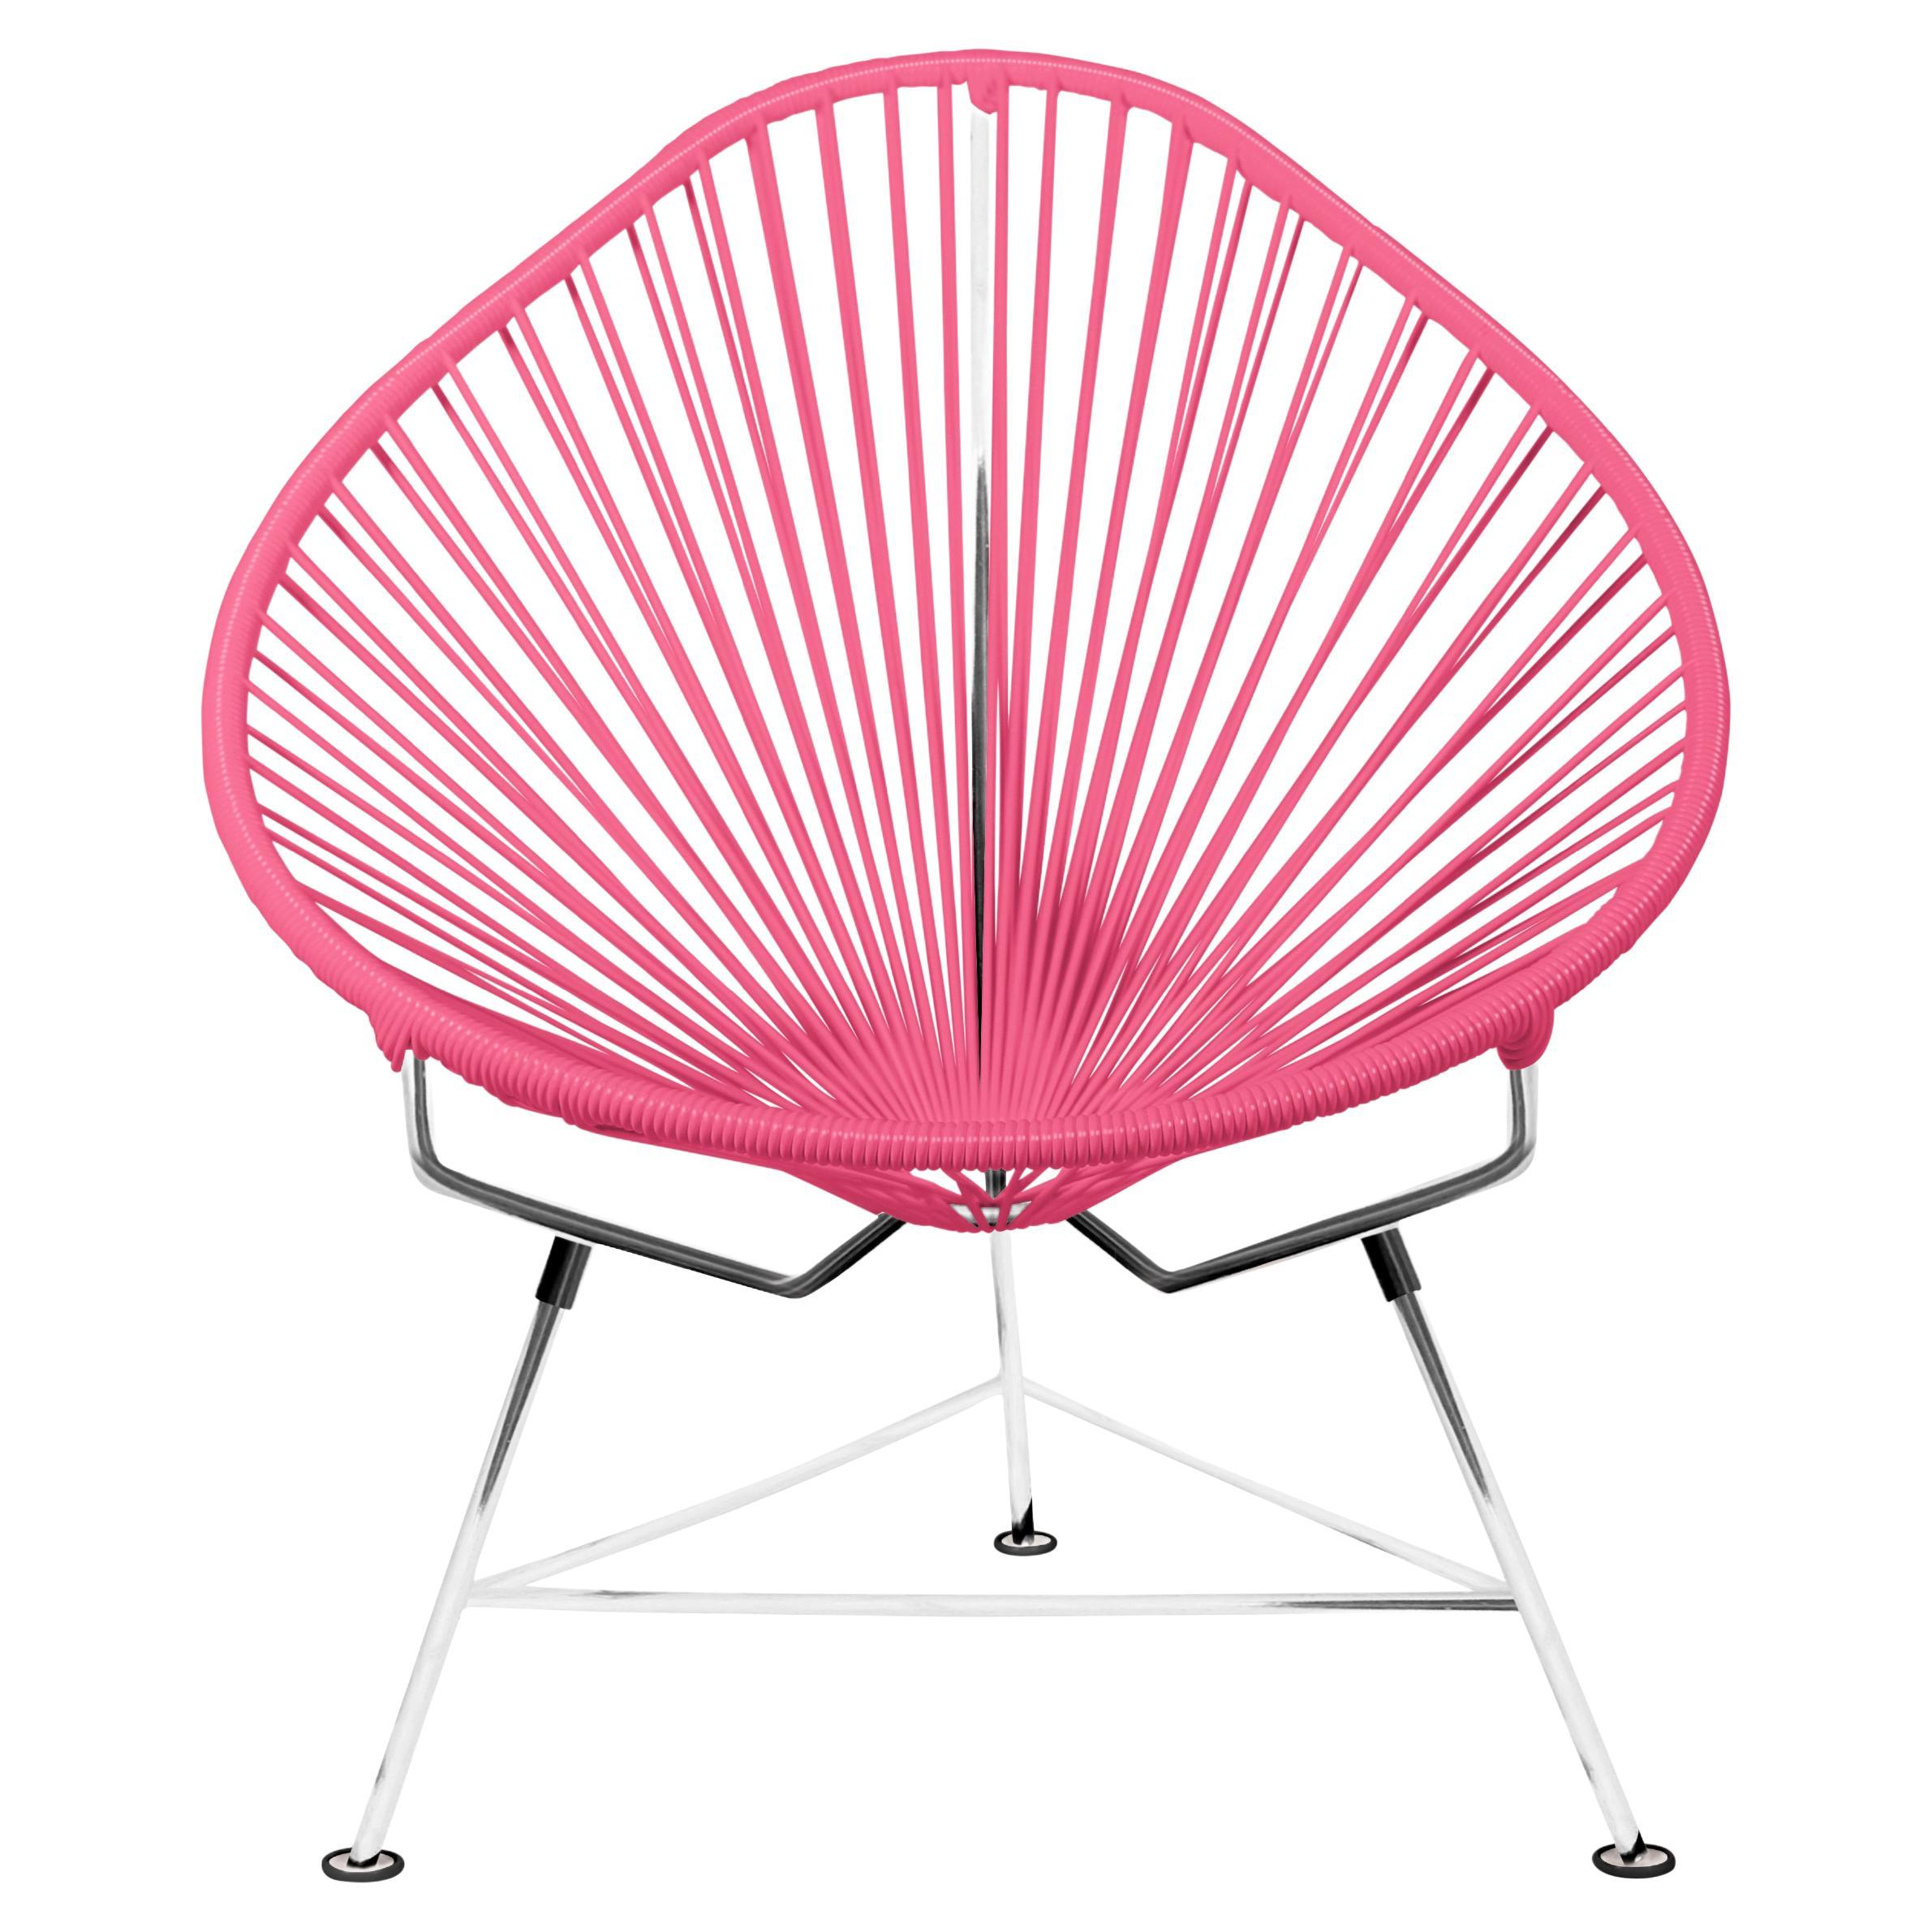 Innit Designs Acapulco Chair Pink Weave on Chrome Frame For Sale